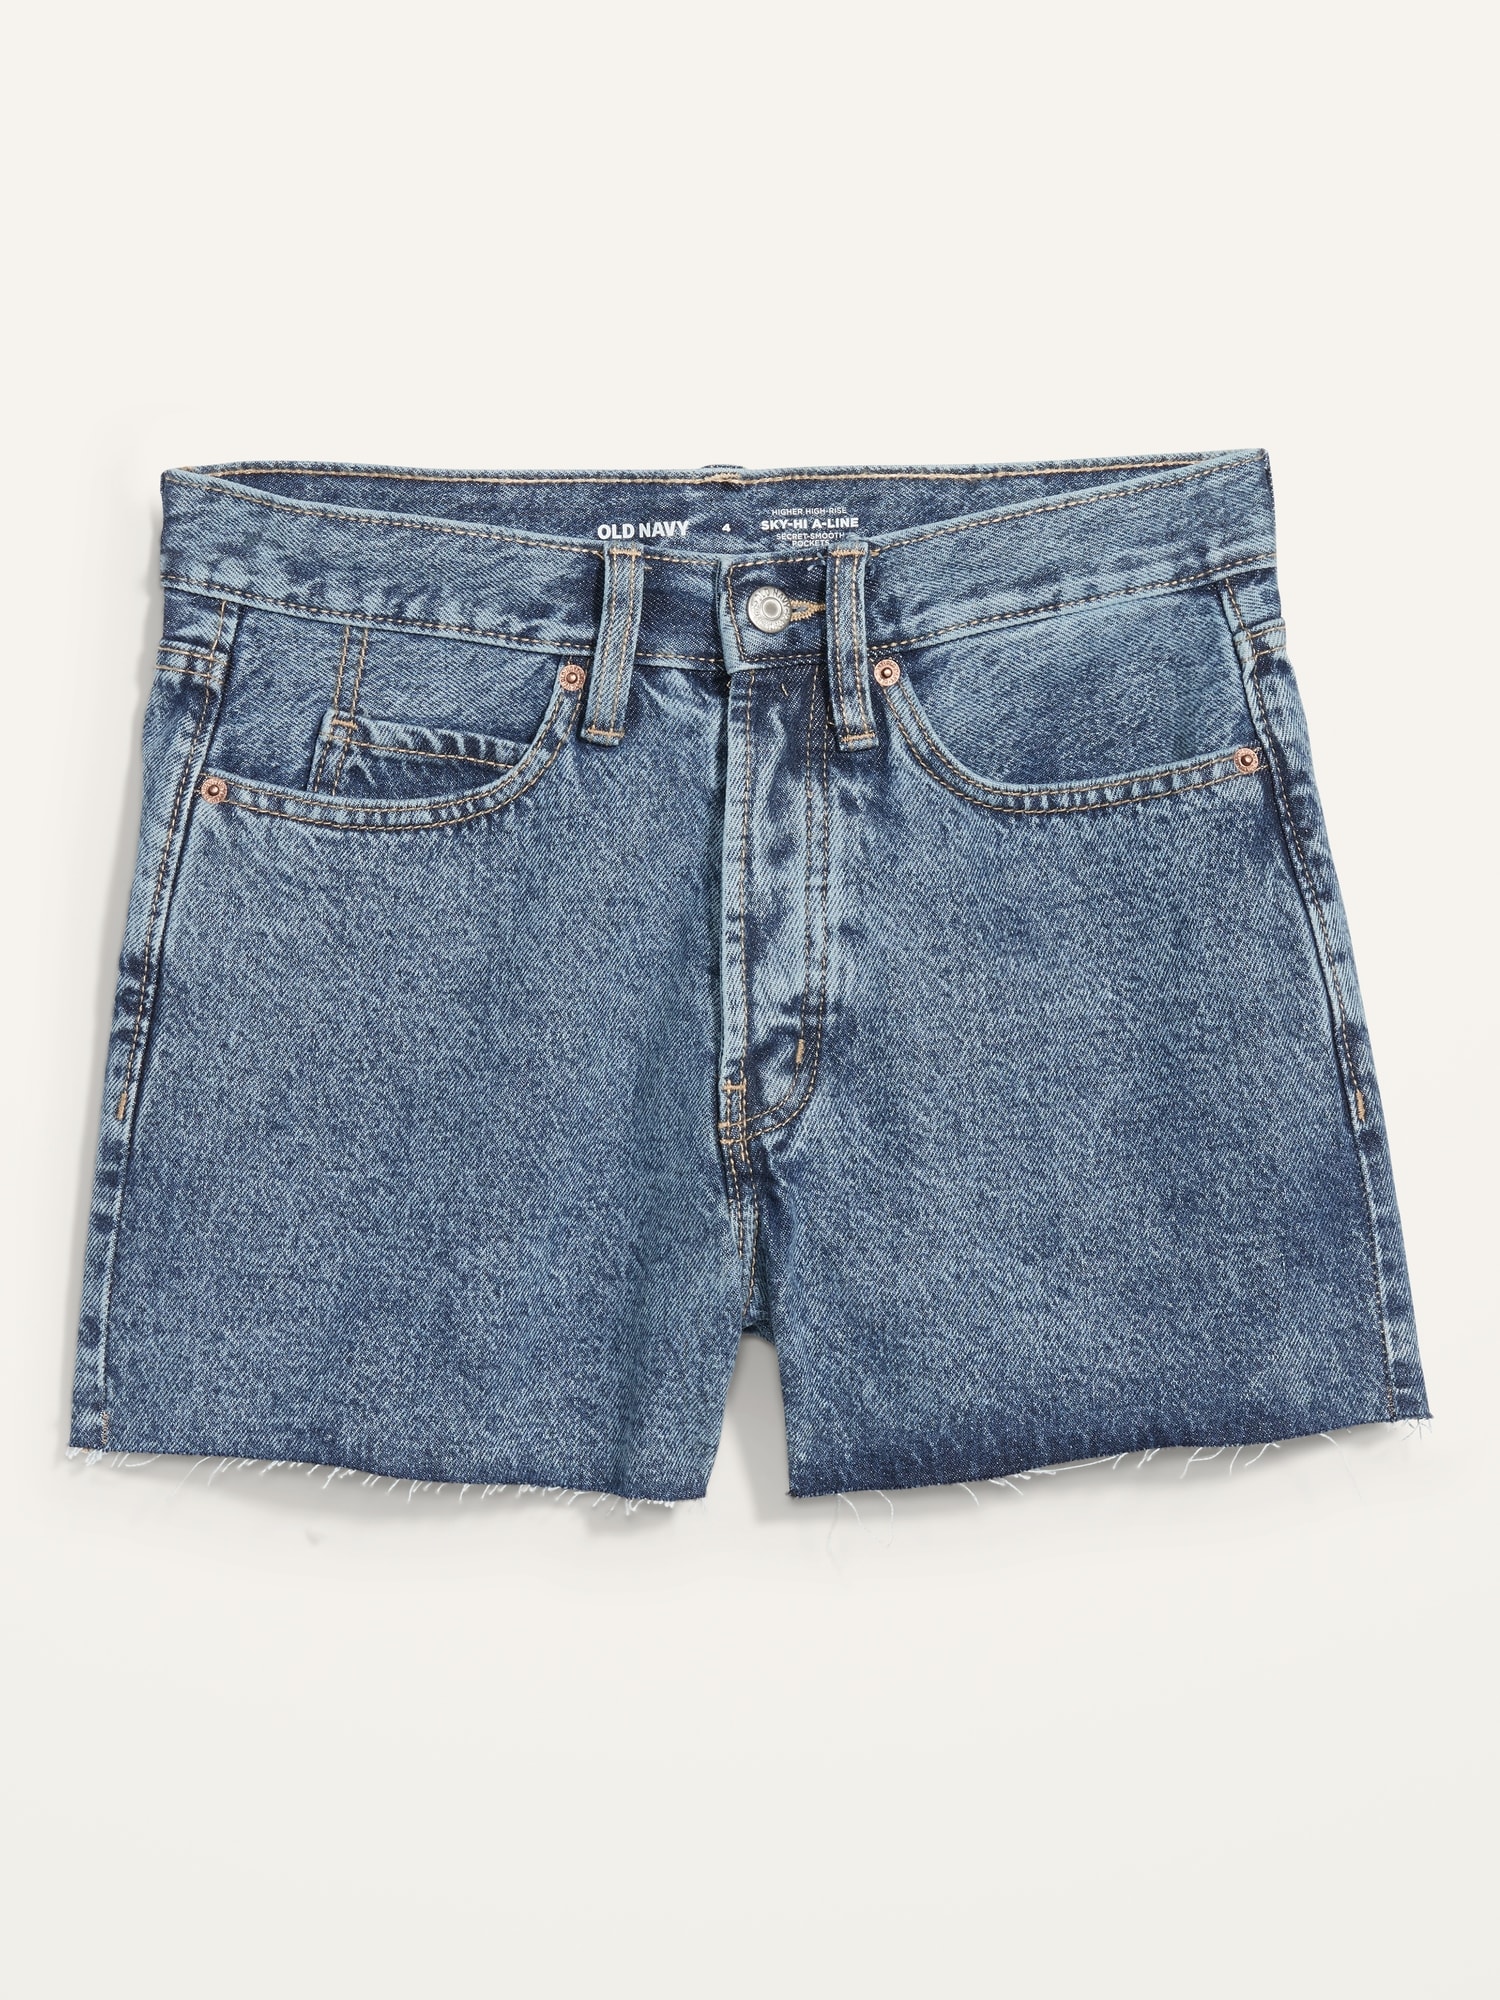 Higher High-Waisted Button-Fly Sky-Hi A-Line Cut-Off Non-Stretch Jean Shorts  for Women -- 3-inch inseam | Old Navy